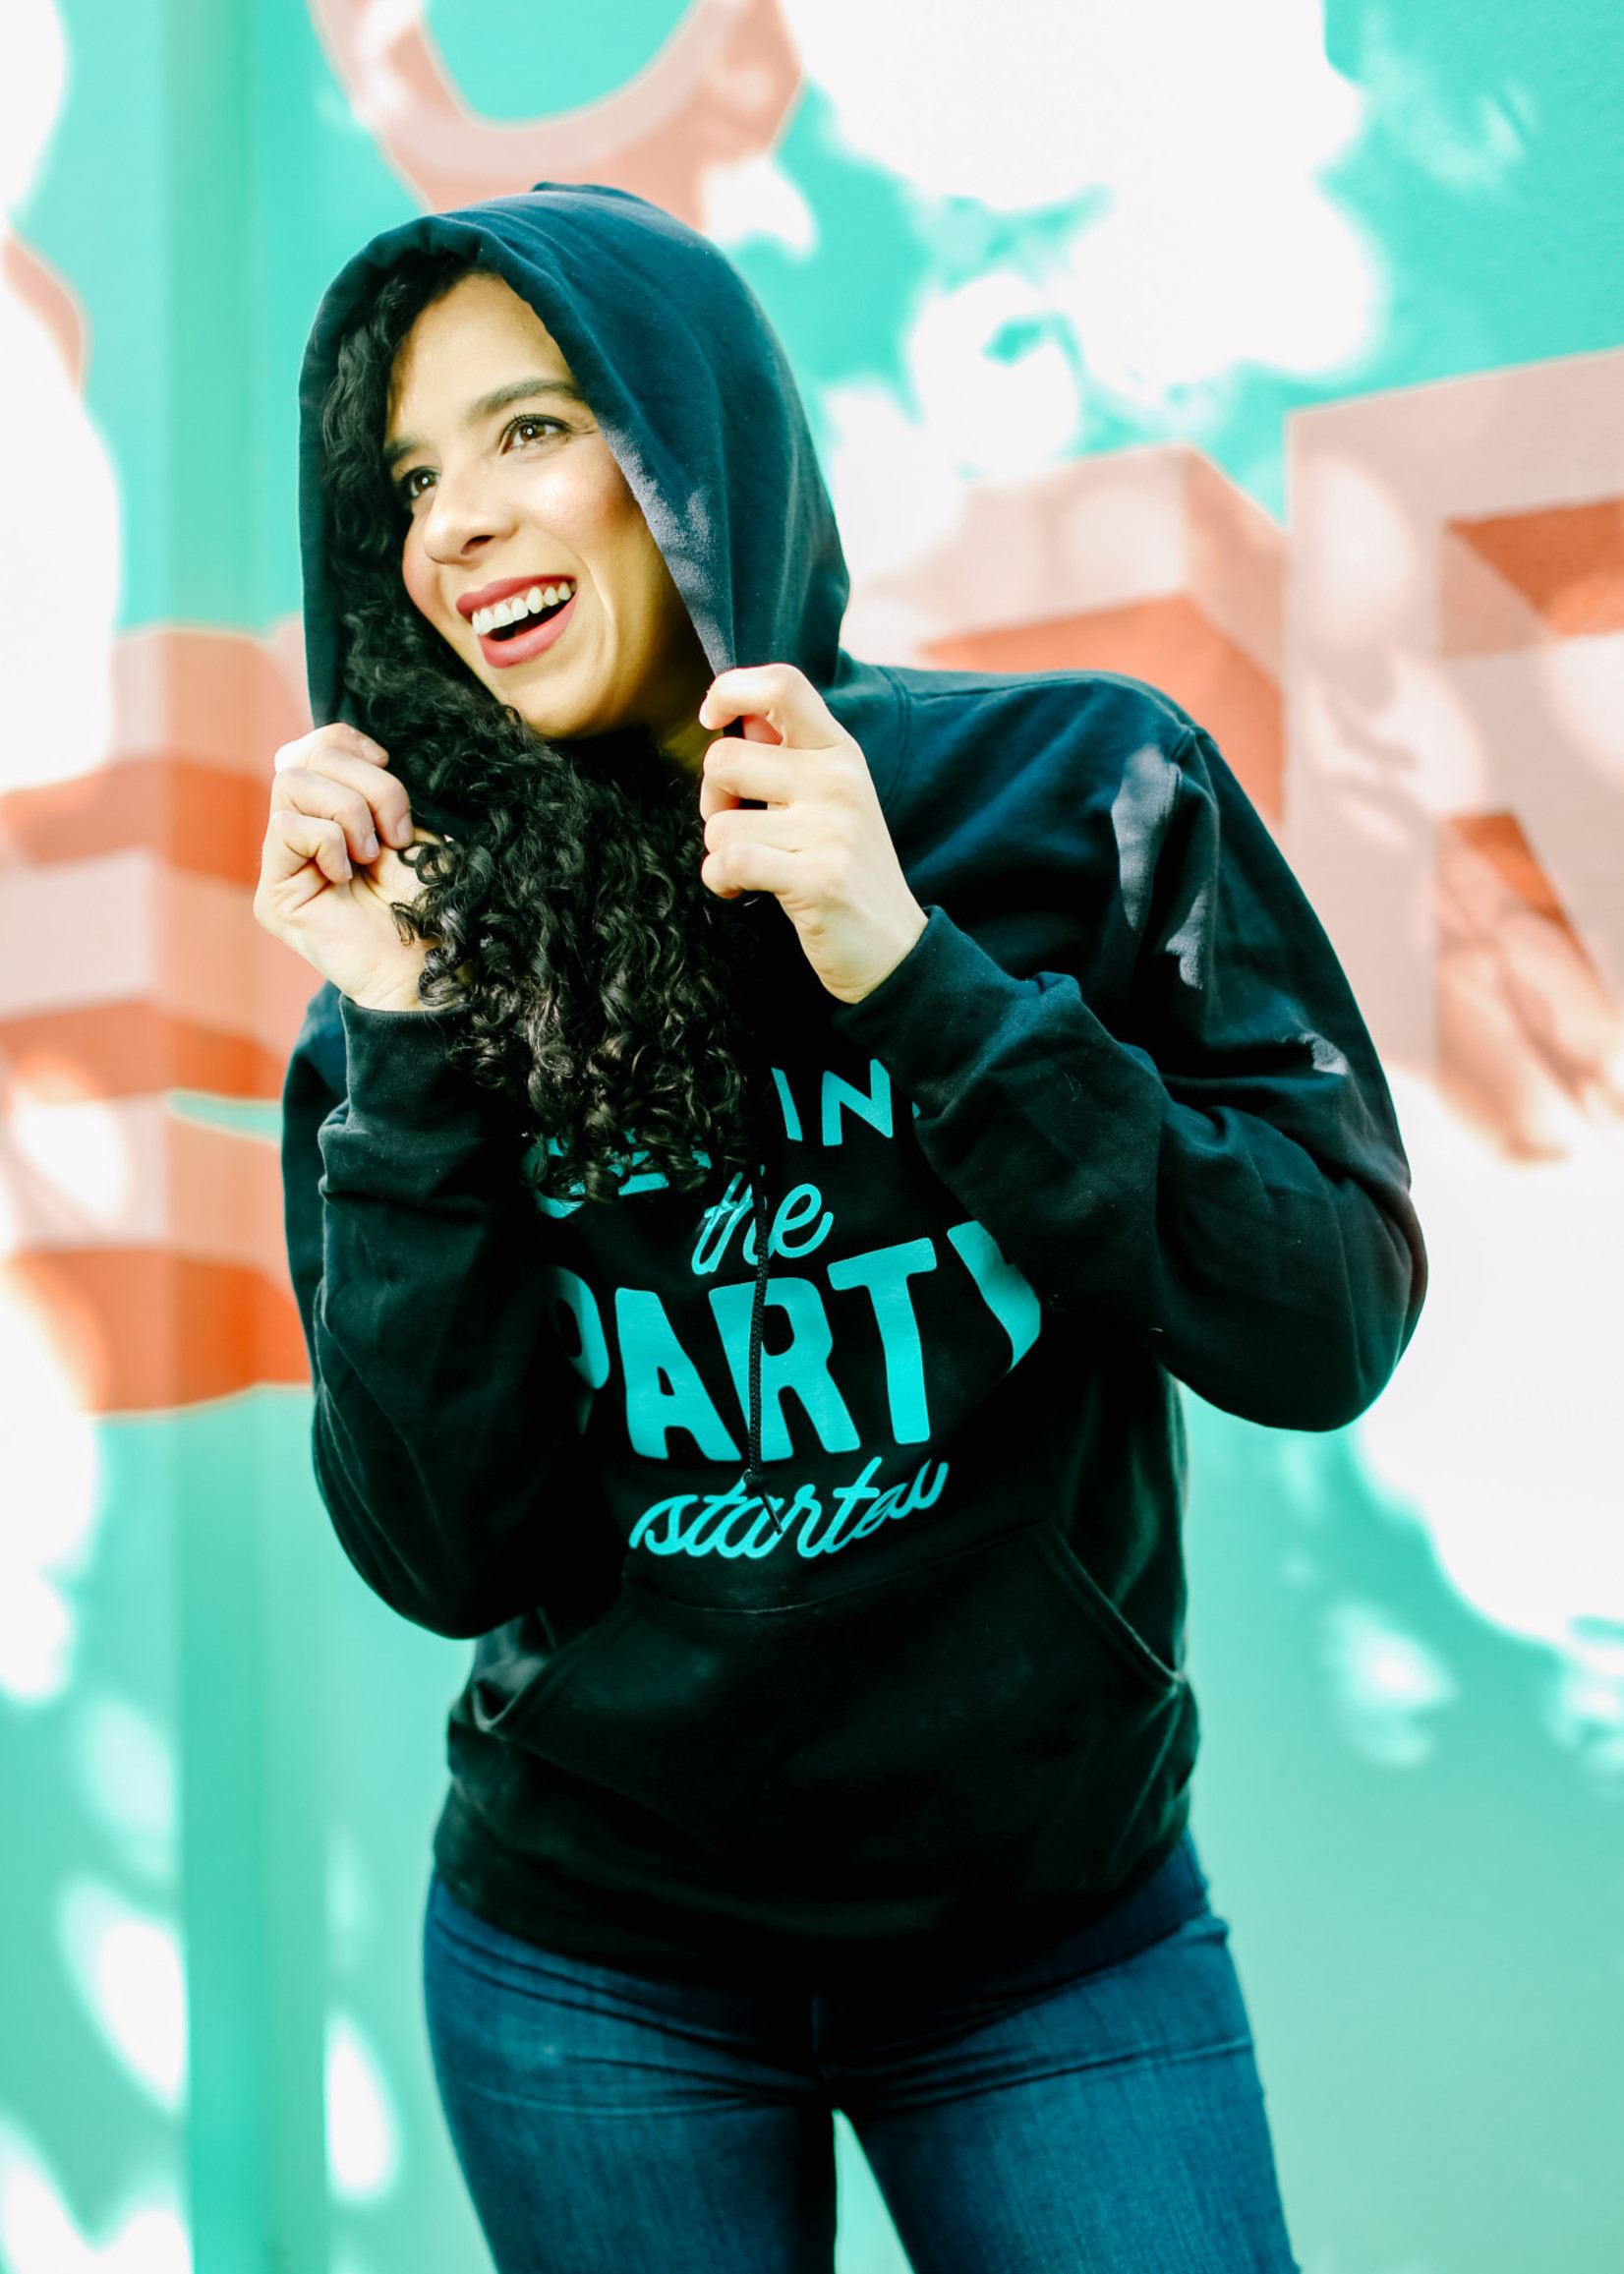 Creative Twist Events Getting the party started hoodie Black